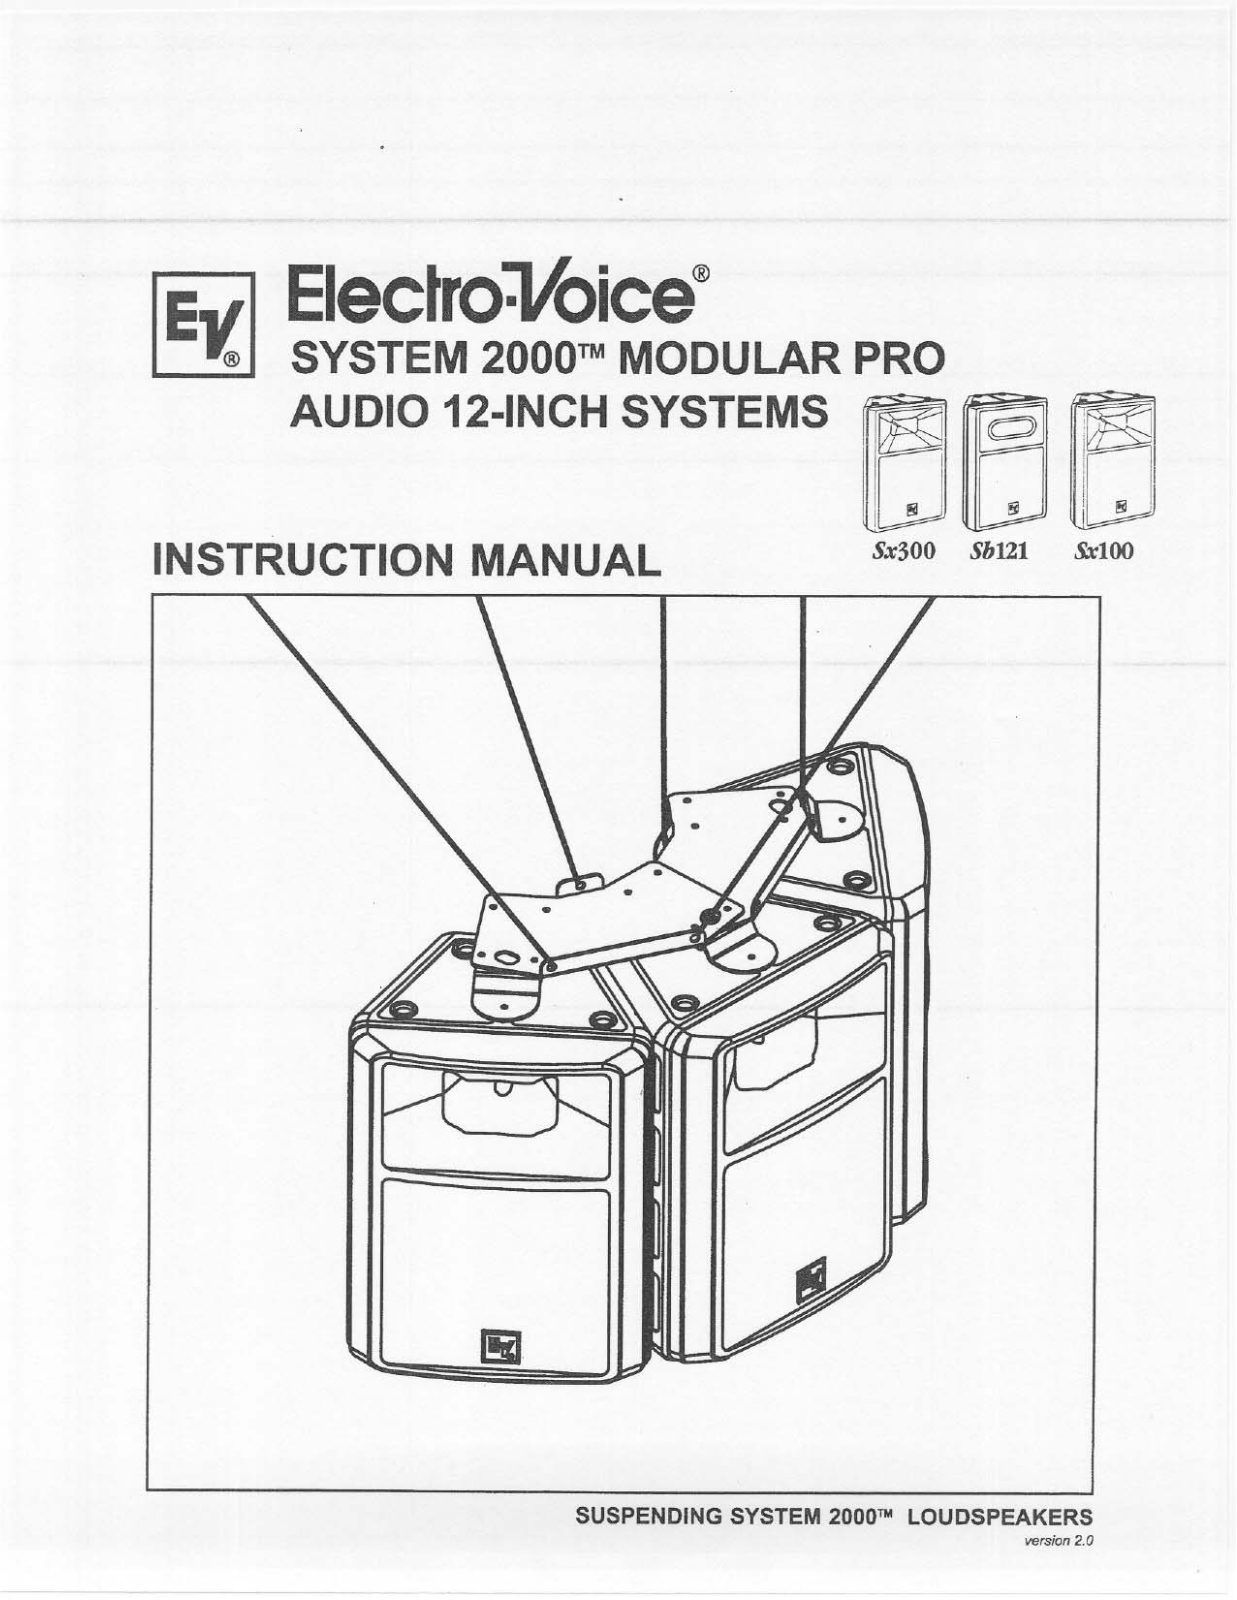 Electro-voice SYSTEM 2000 Manual